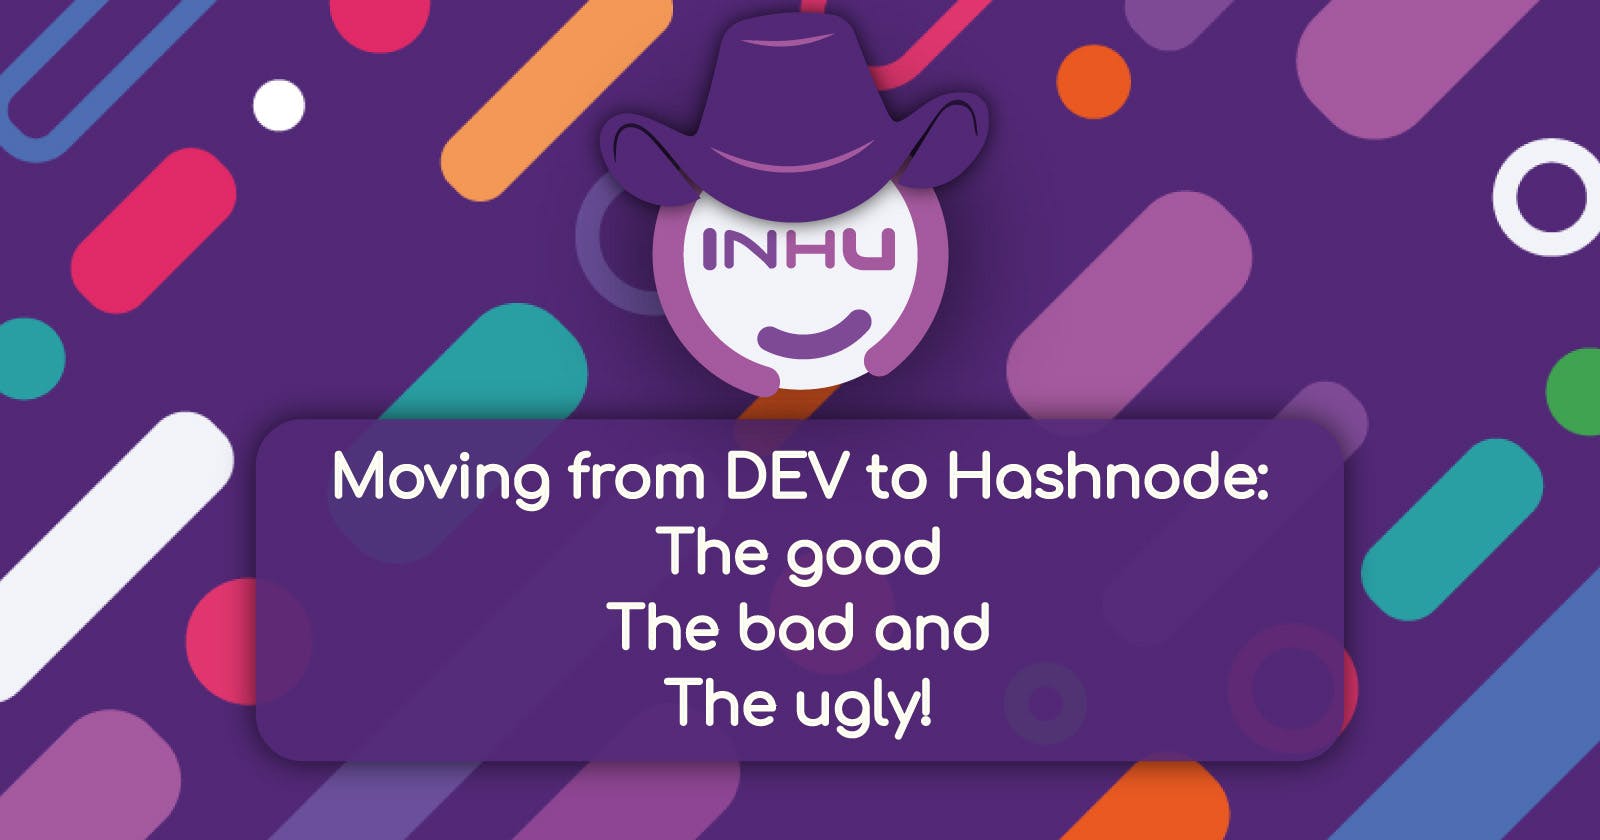 Moving from DEV to Hashnode, the good, the bad and the ugly!